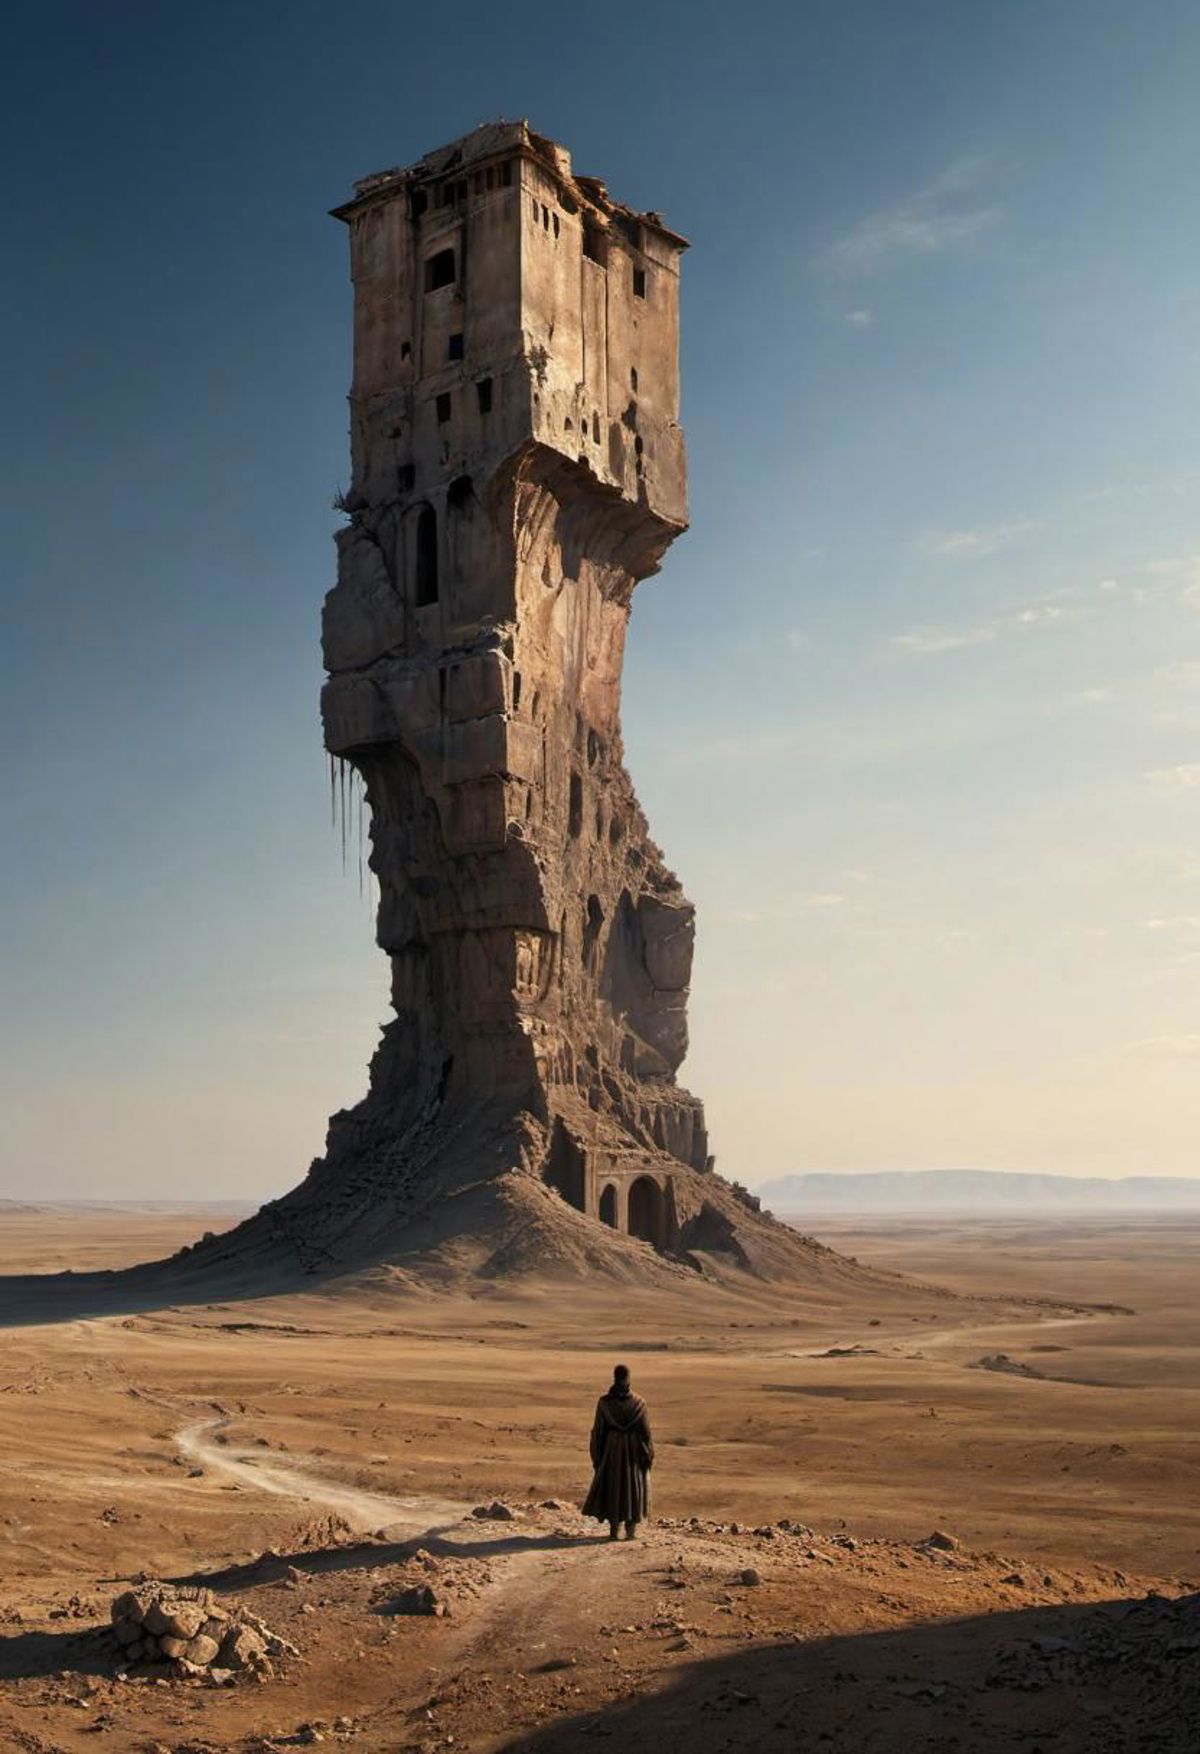 A person standing in front of a tall, crumbling tower in a desert.